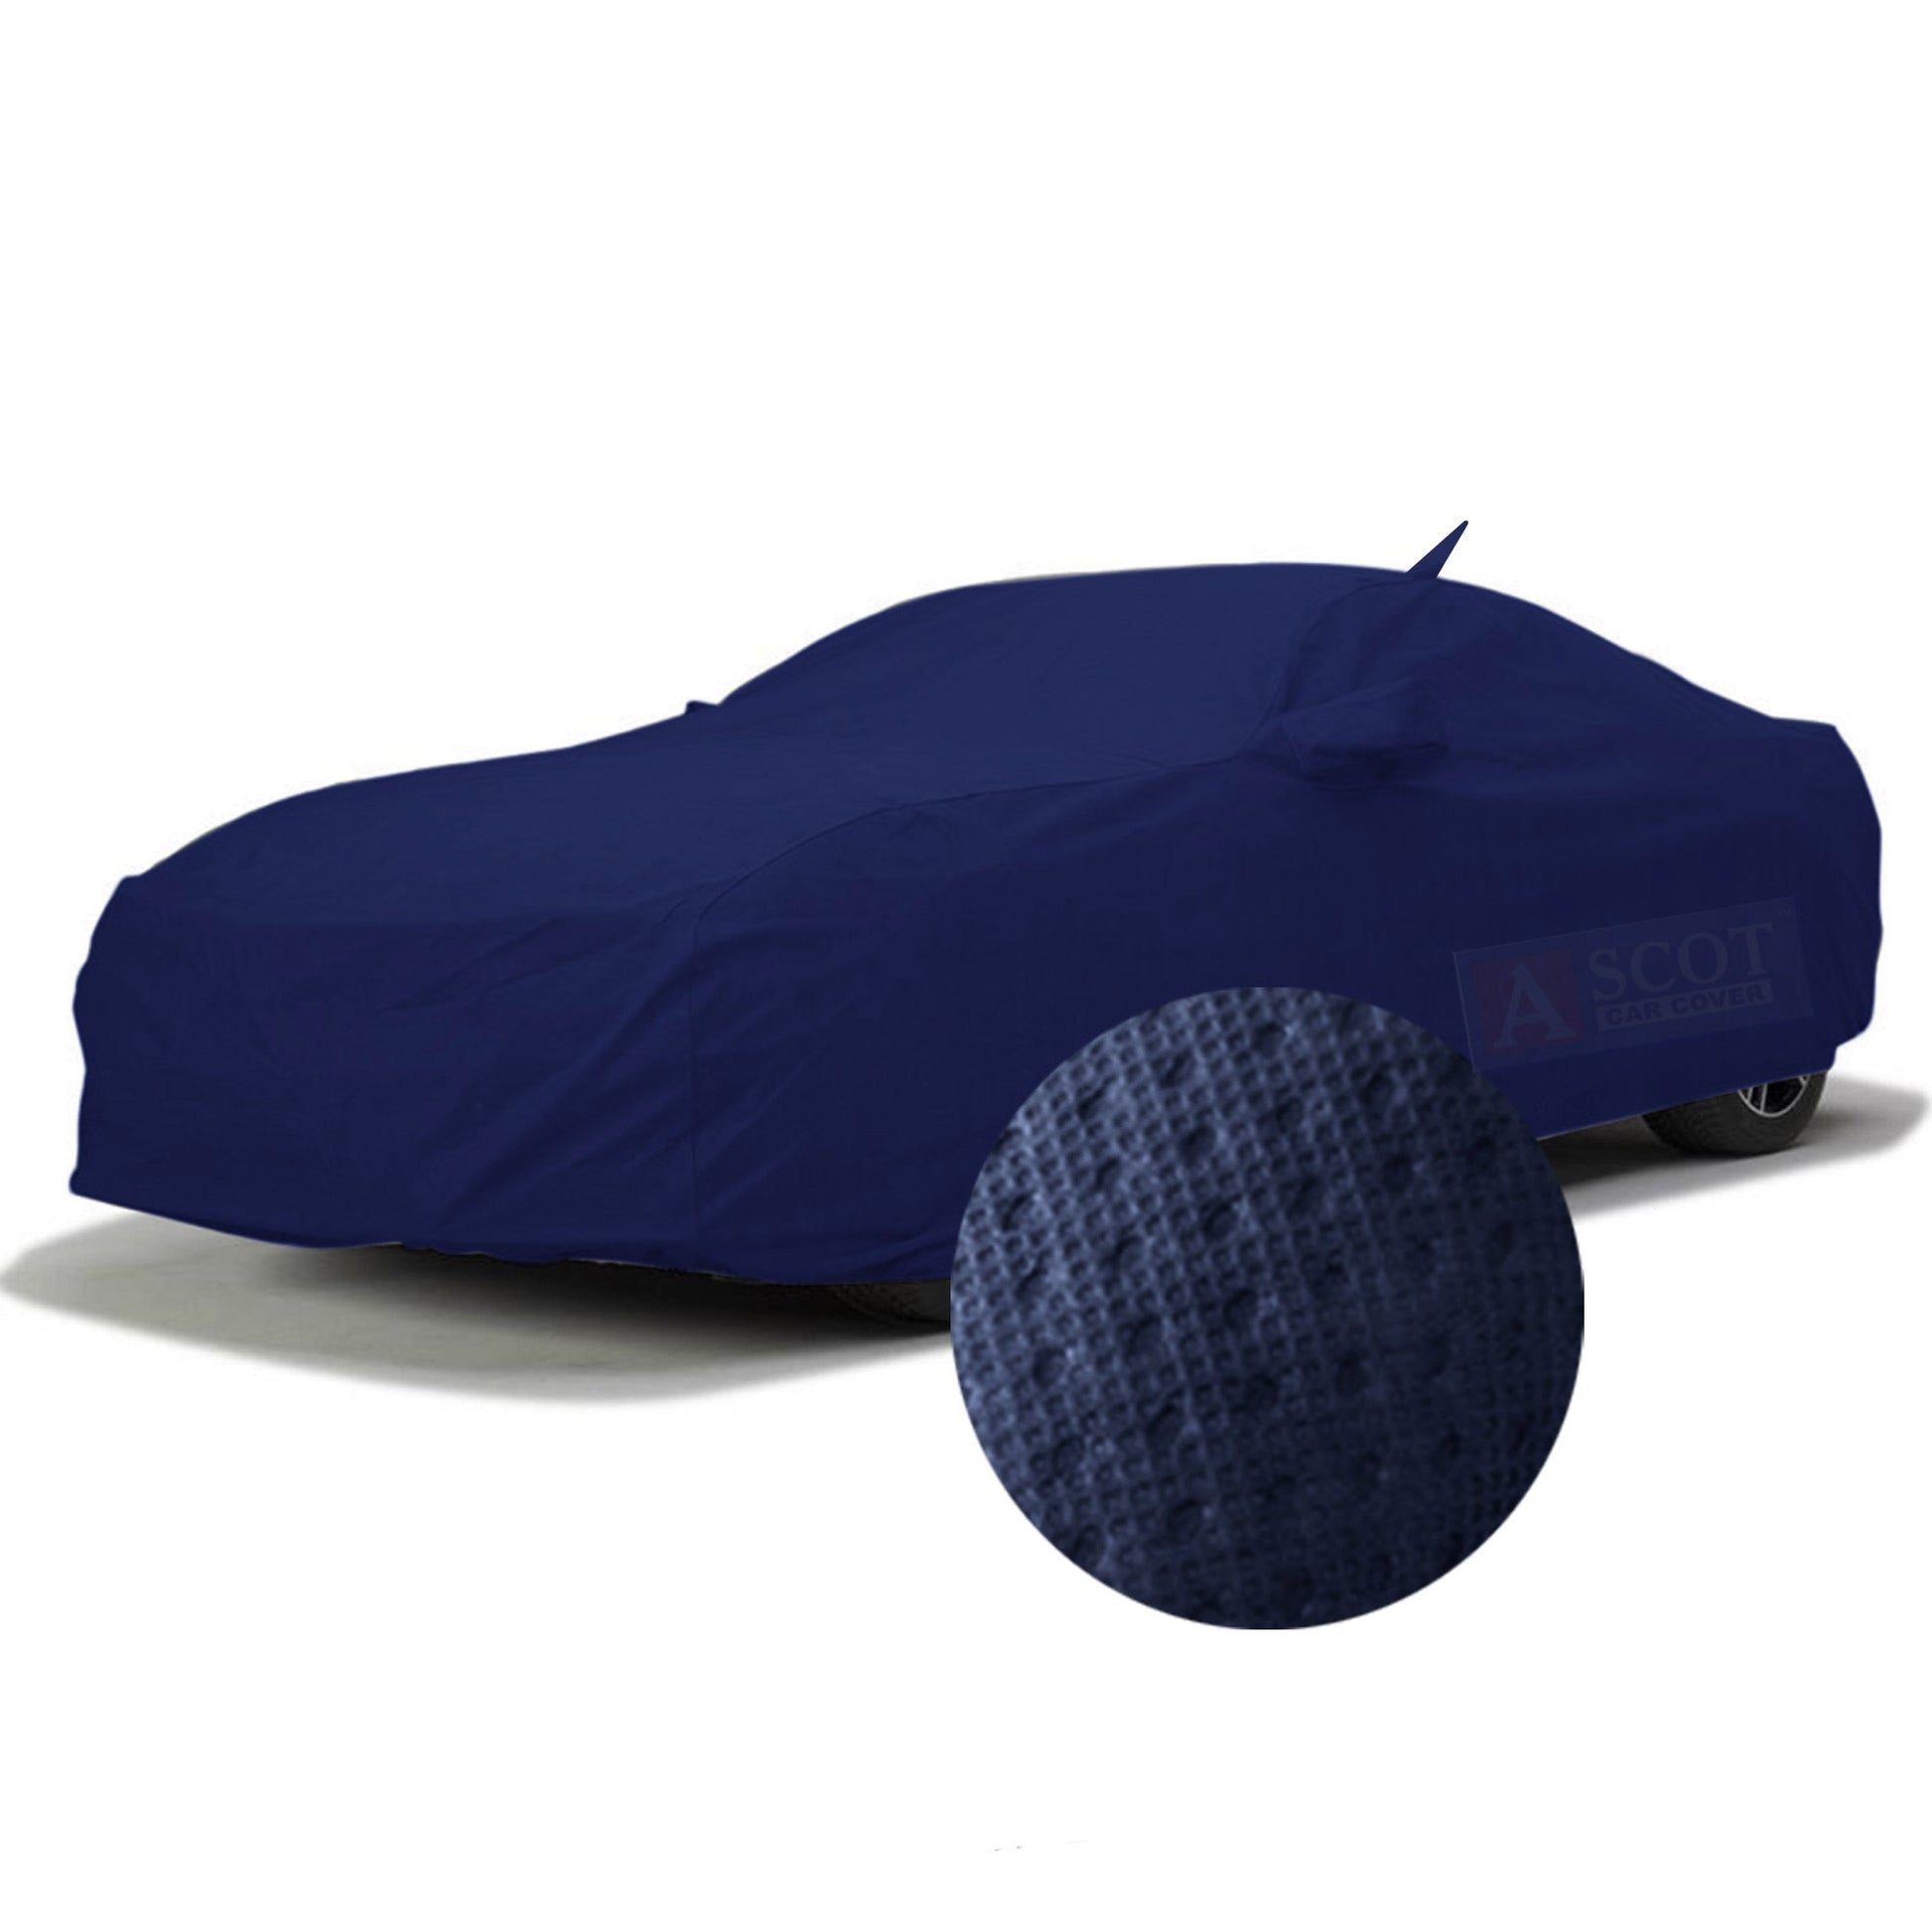 Sedan Car Covered with Blue Waterproof Car Cover with a zoom fabric image